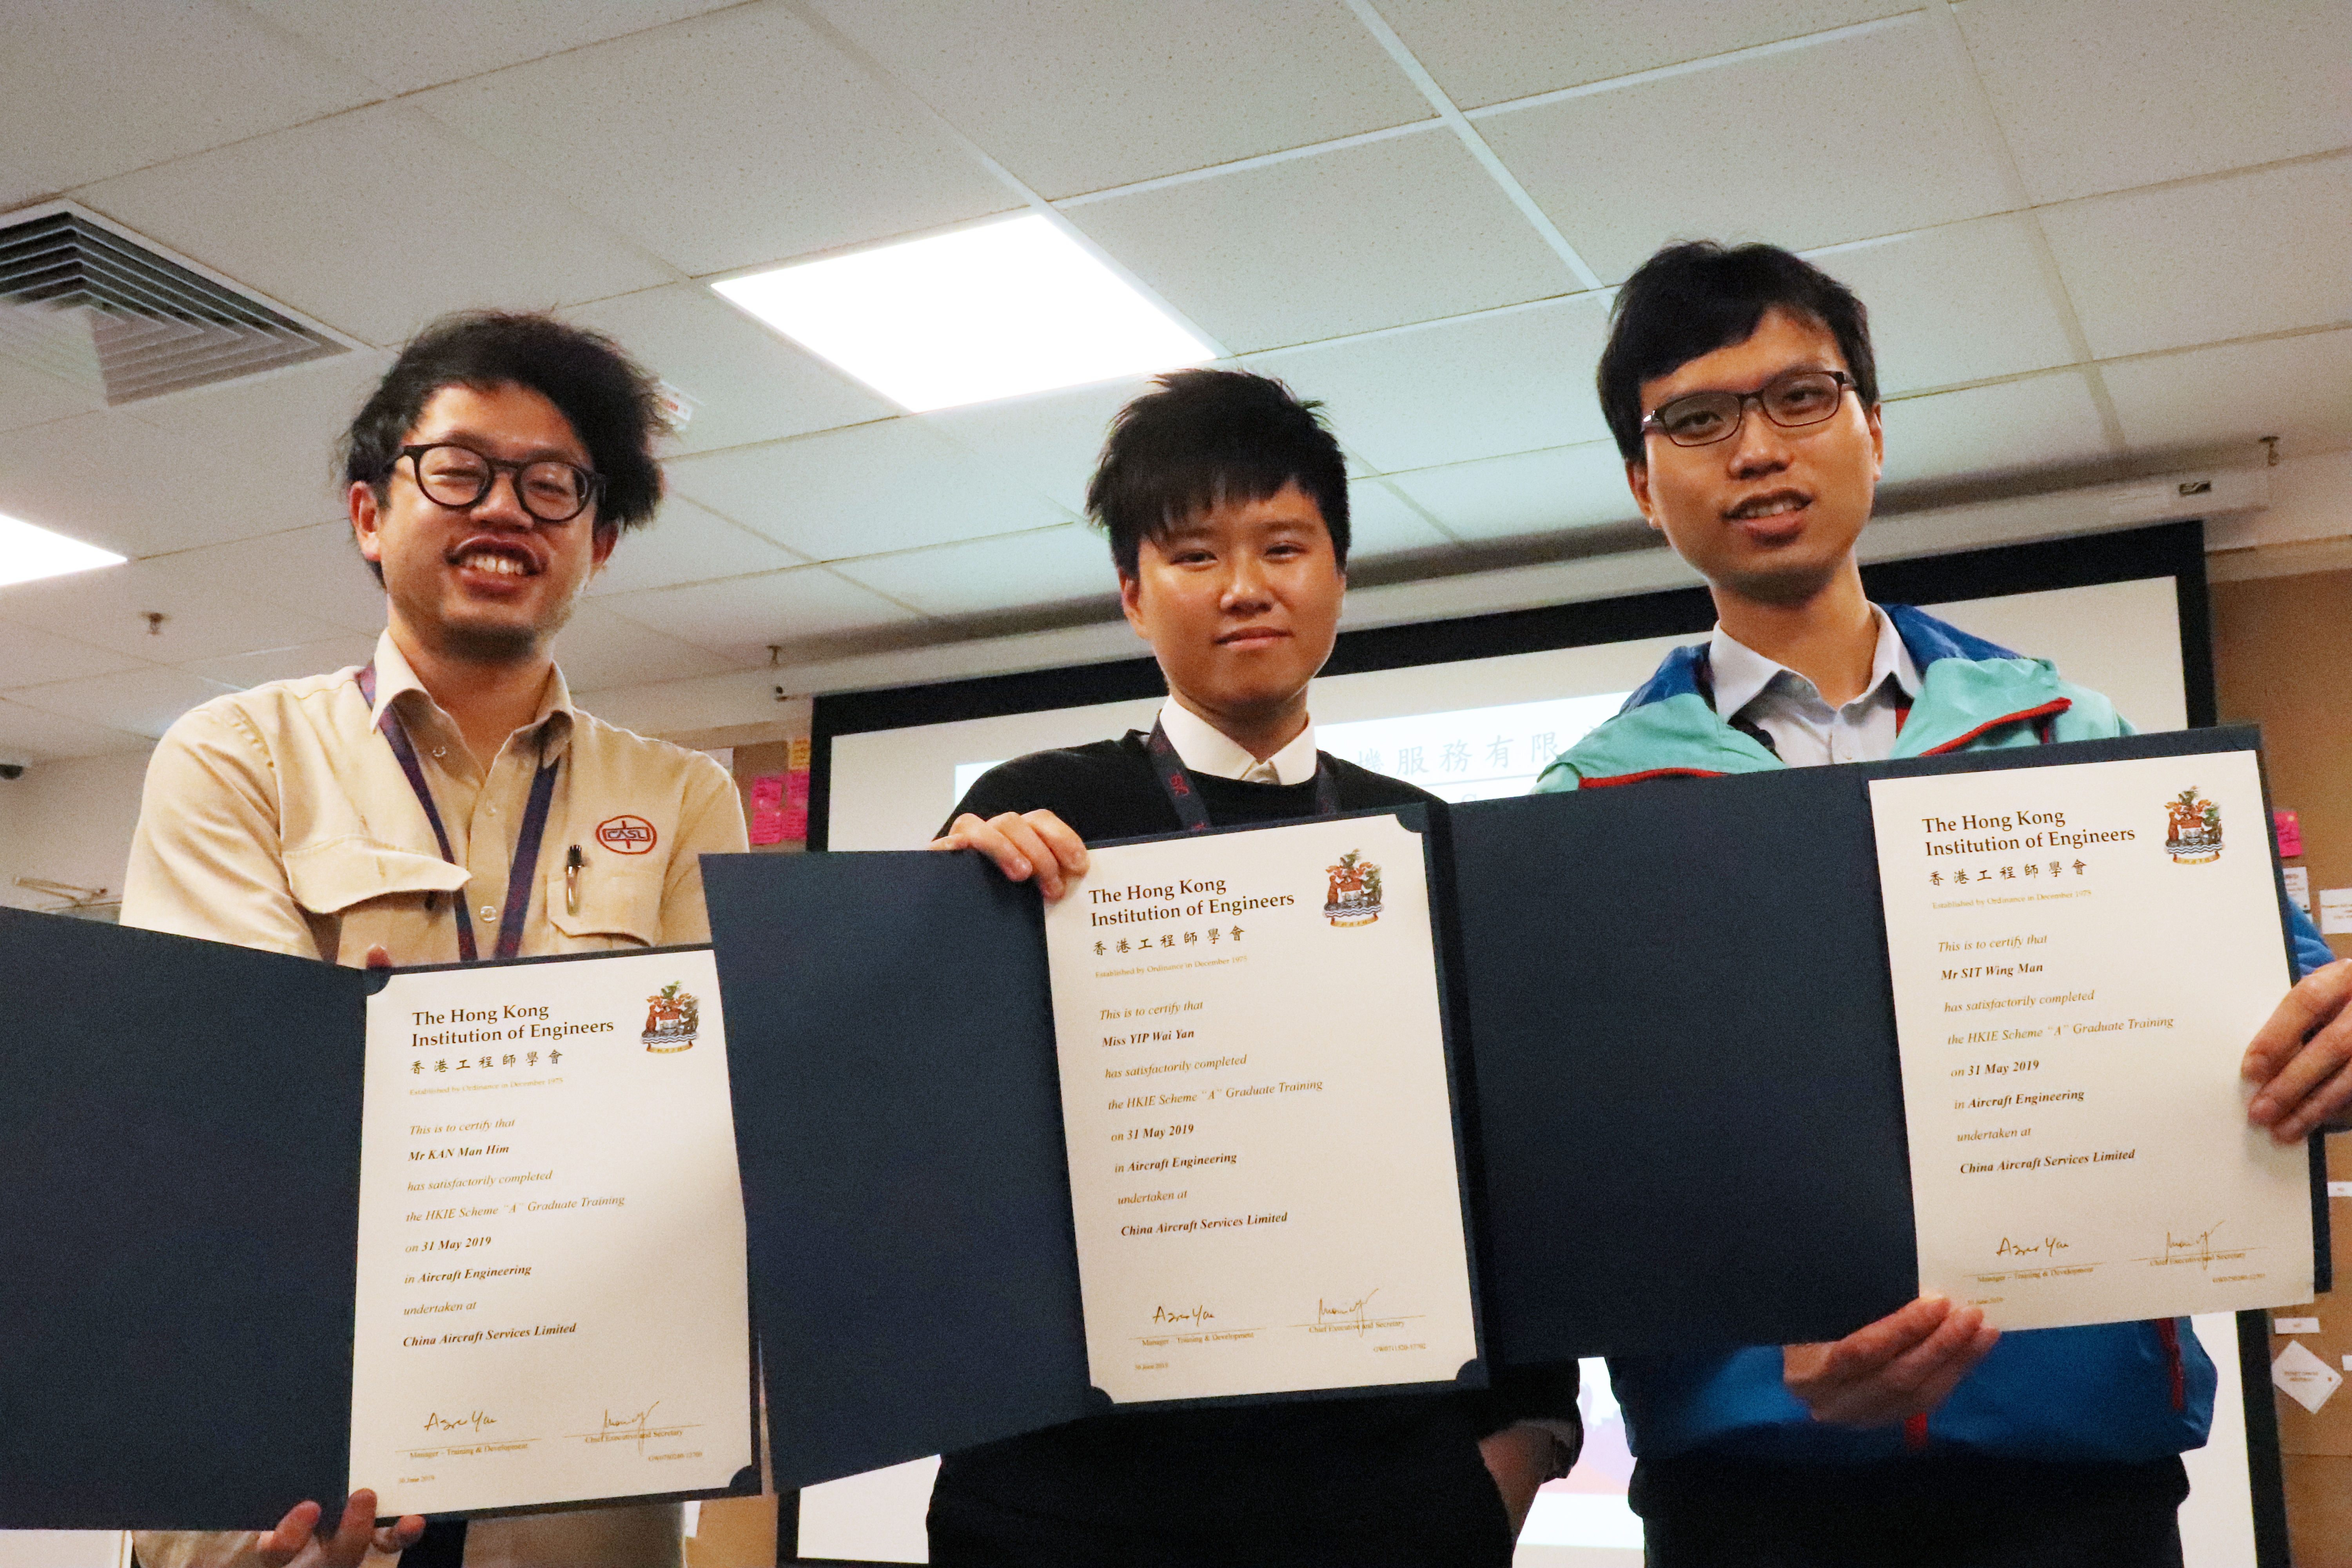 Our Team C CASL Engineering Trainees Graduated!